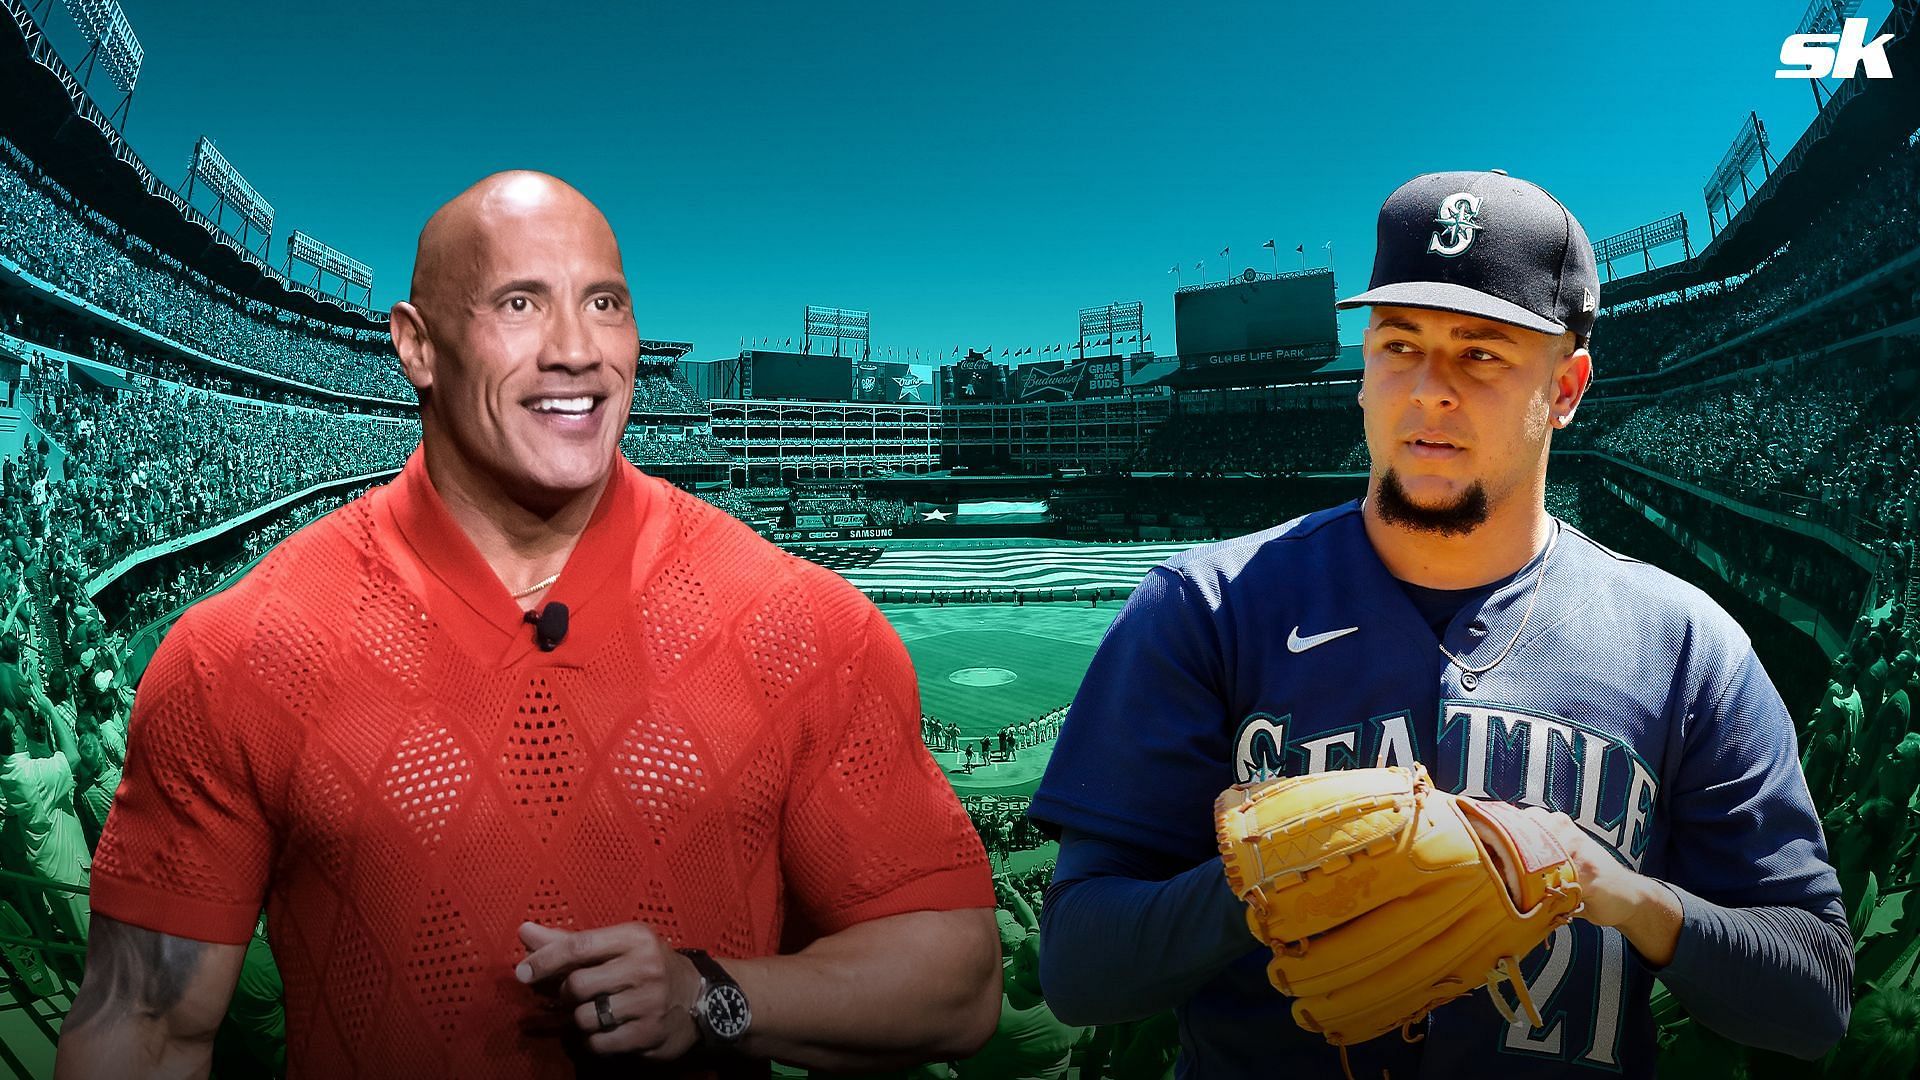 The Mariners shared a picture that revealed an uncanny resemblance between Luis Castillo and Dwayne Johnson